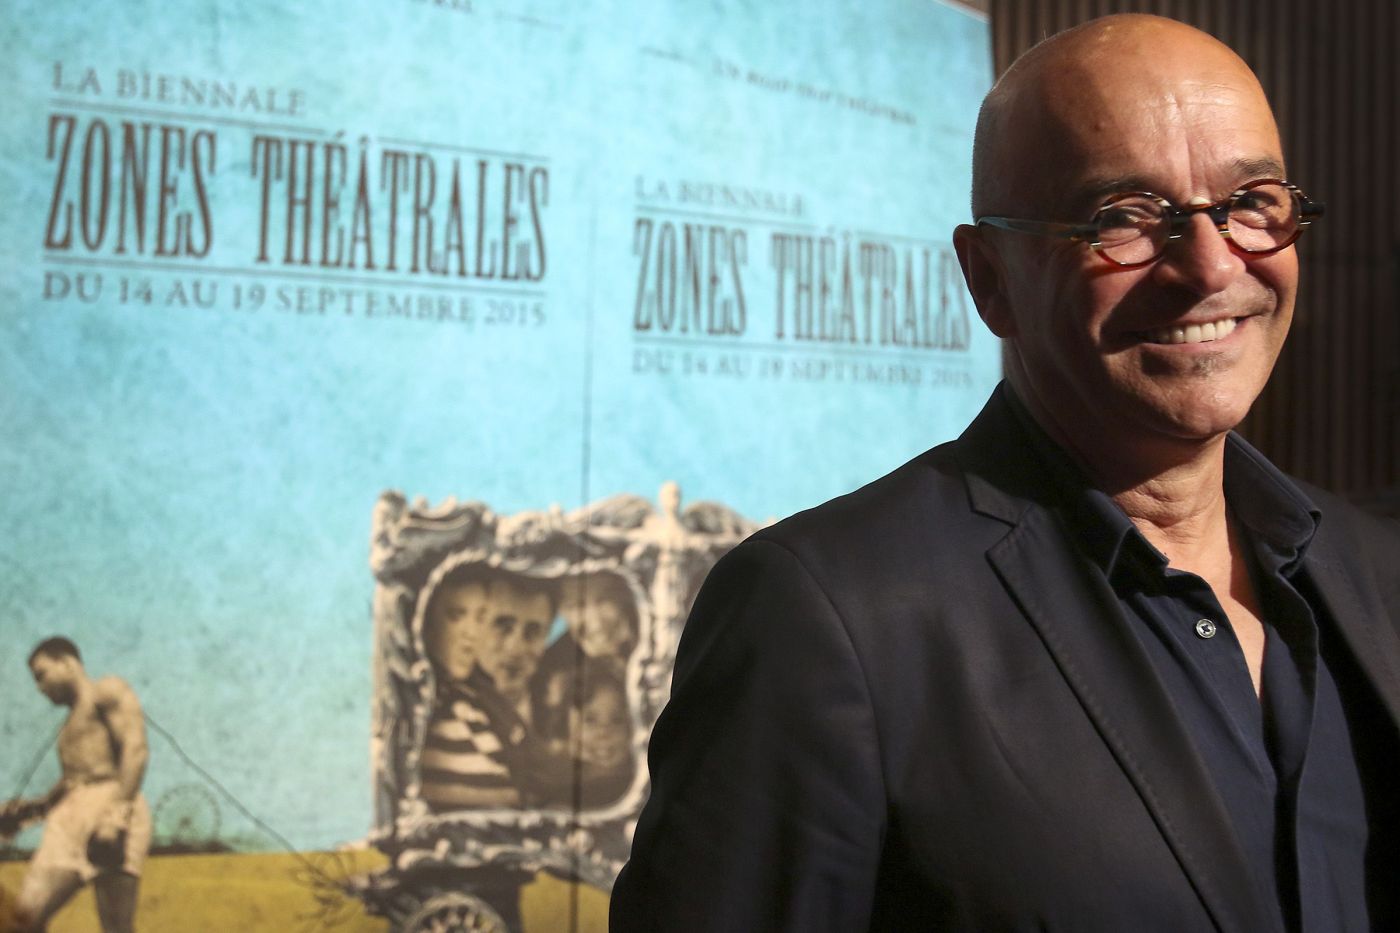 Colour photograph of a bald, smiling, middle-aged man. He wears glasses and a dark suit, standing in front of pale blue posters bearing the words “LA BIENNALE ZONES THÉÂTRALES DU 14 AU 19 SEPTEMBRE 2015”